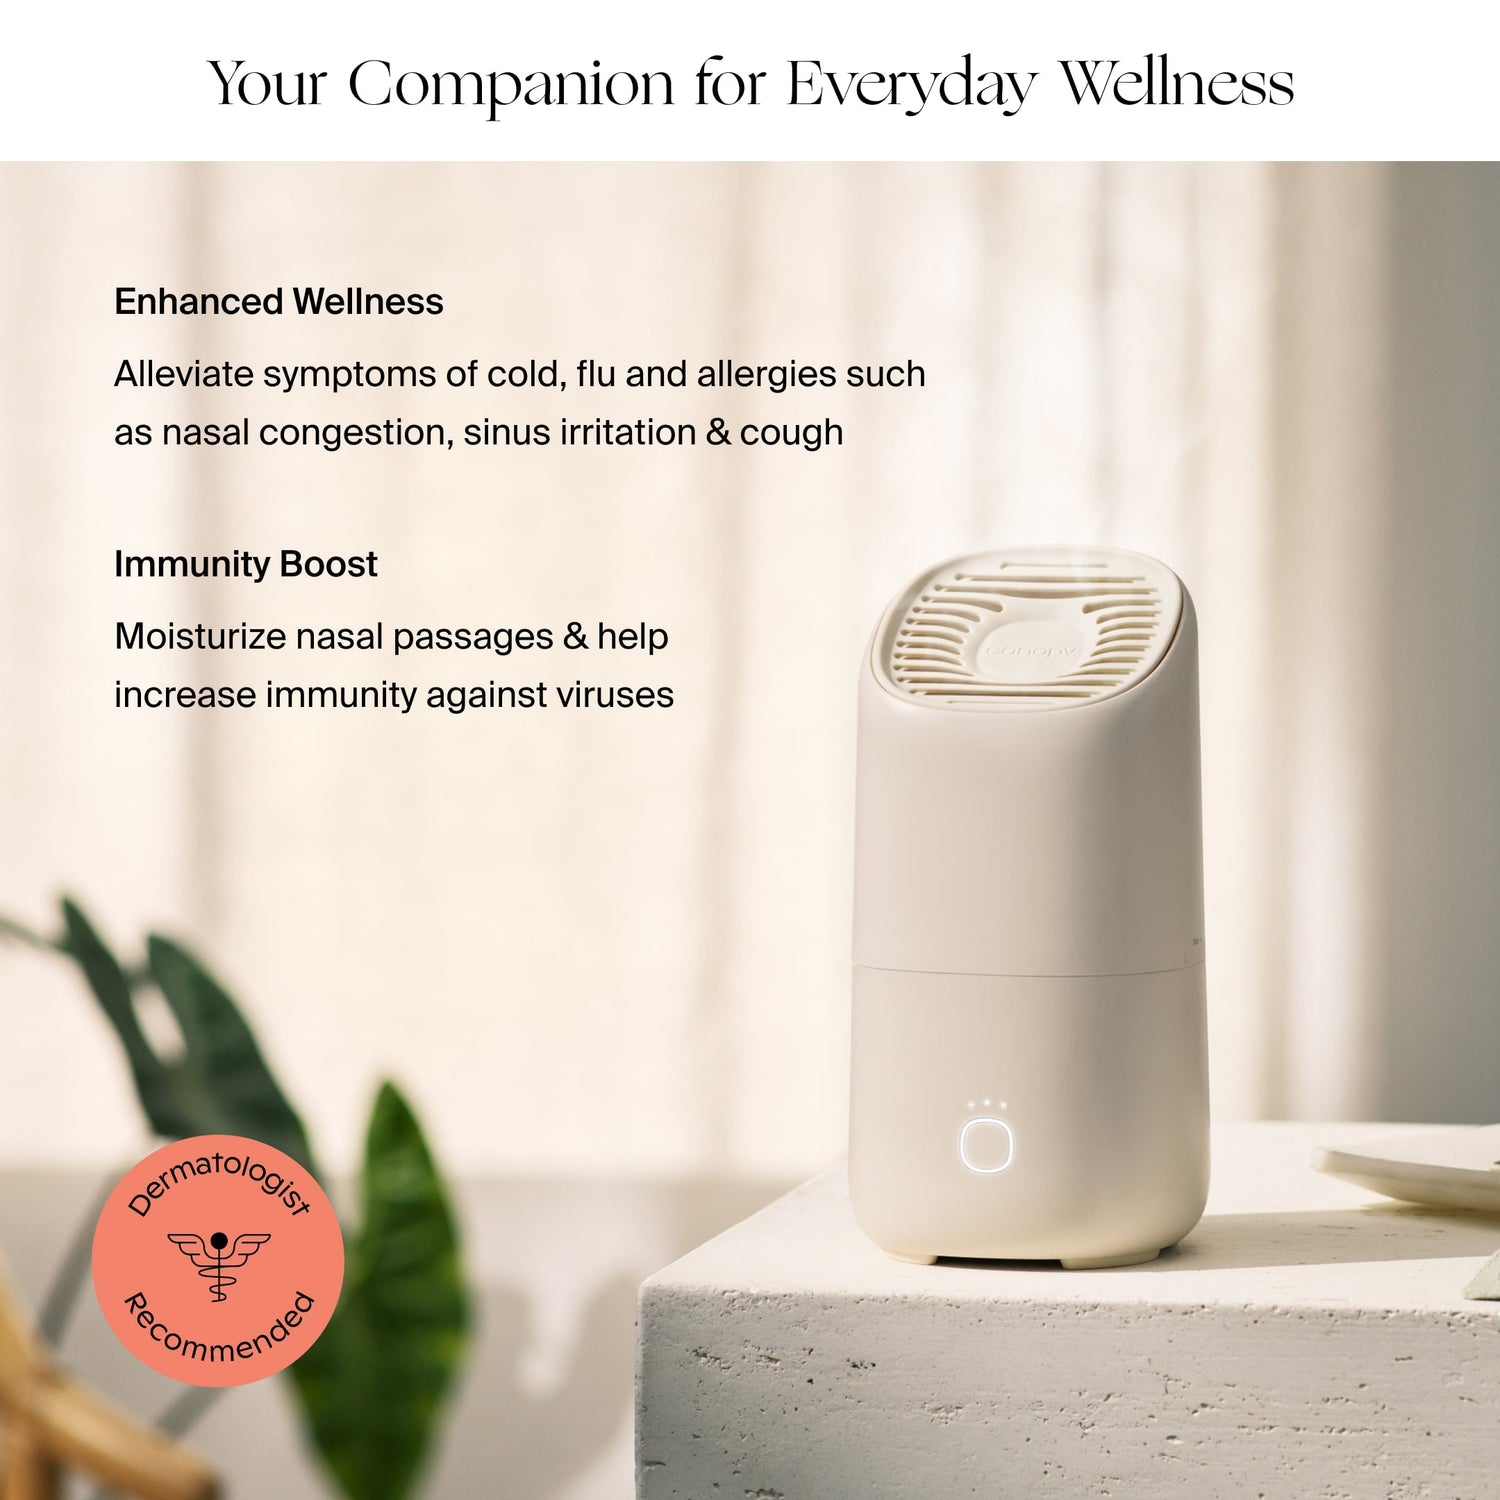 Portable Humidifier Duo | Lifestyle, Your Companion for Everyday Wellness